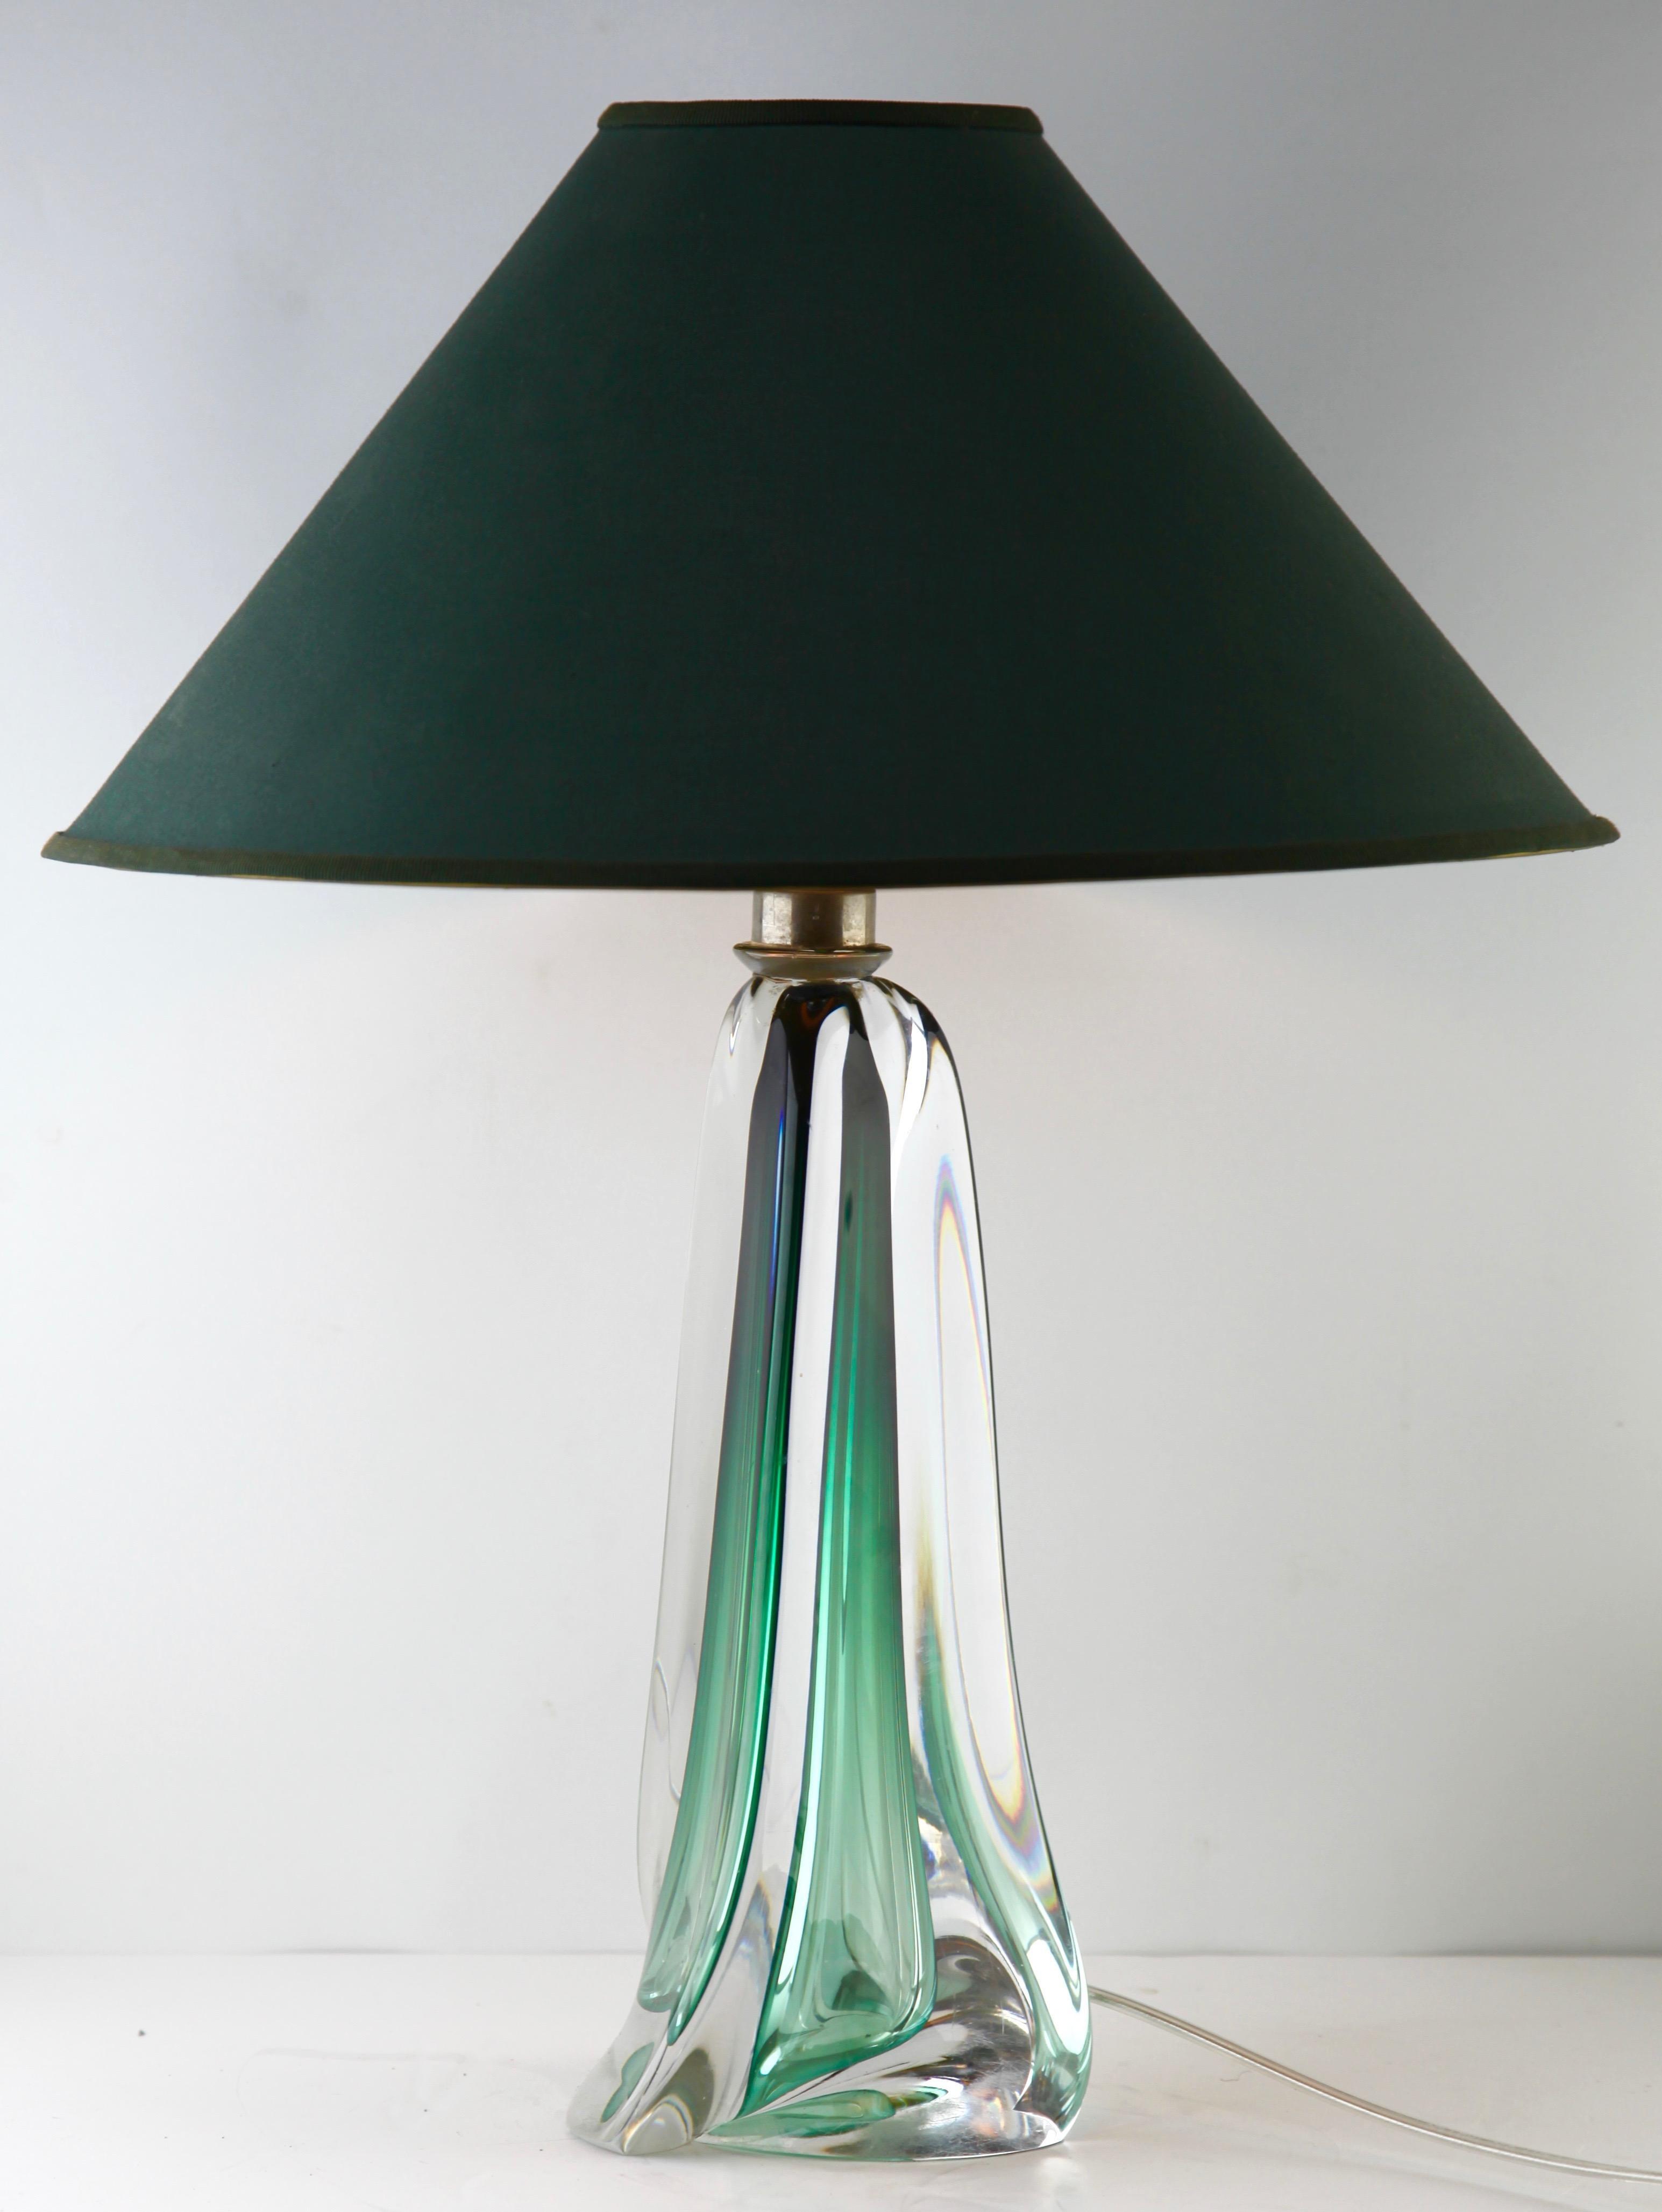 This simple yet graceful table lamp is in large size, 14.56 inches excluding the shade.
The core in Classic Val Saint Lambert has been given a thick Sommerso (clear crystal casing) so that the object appears delicate whilst remaining solid and